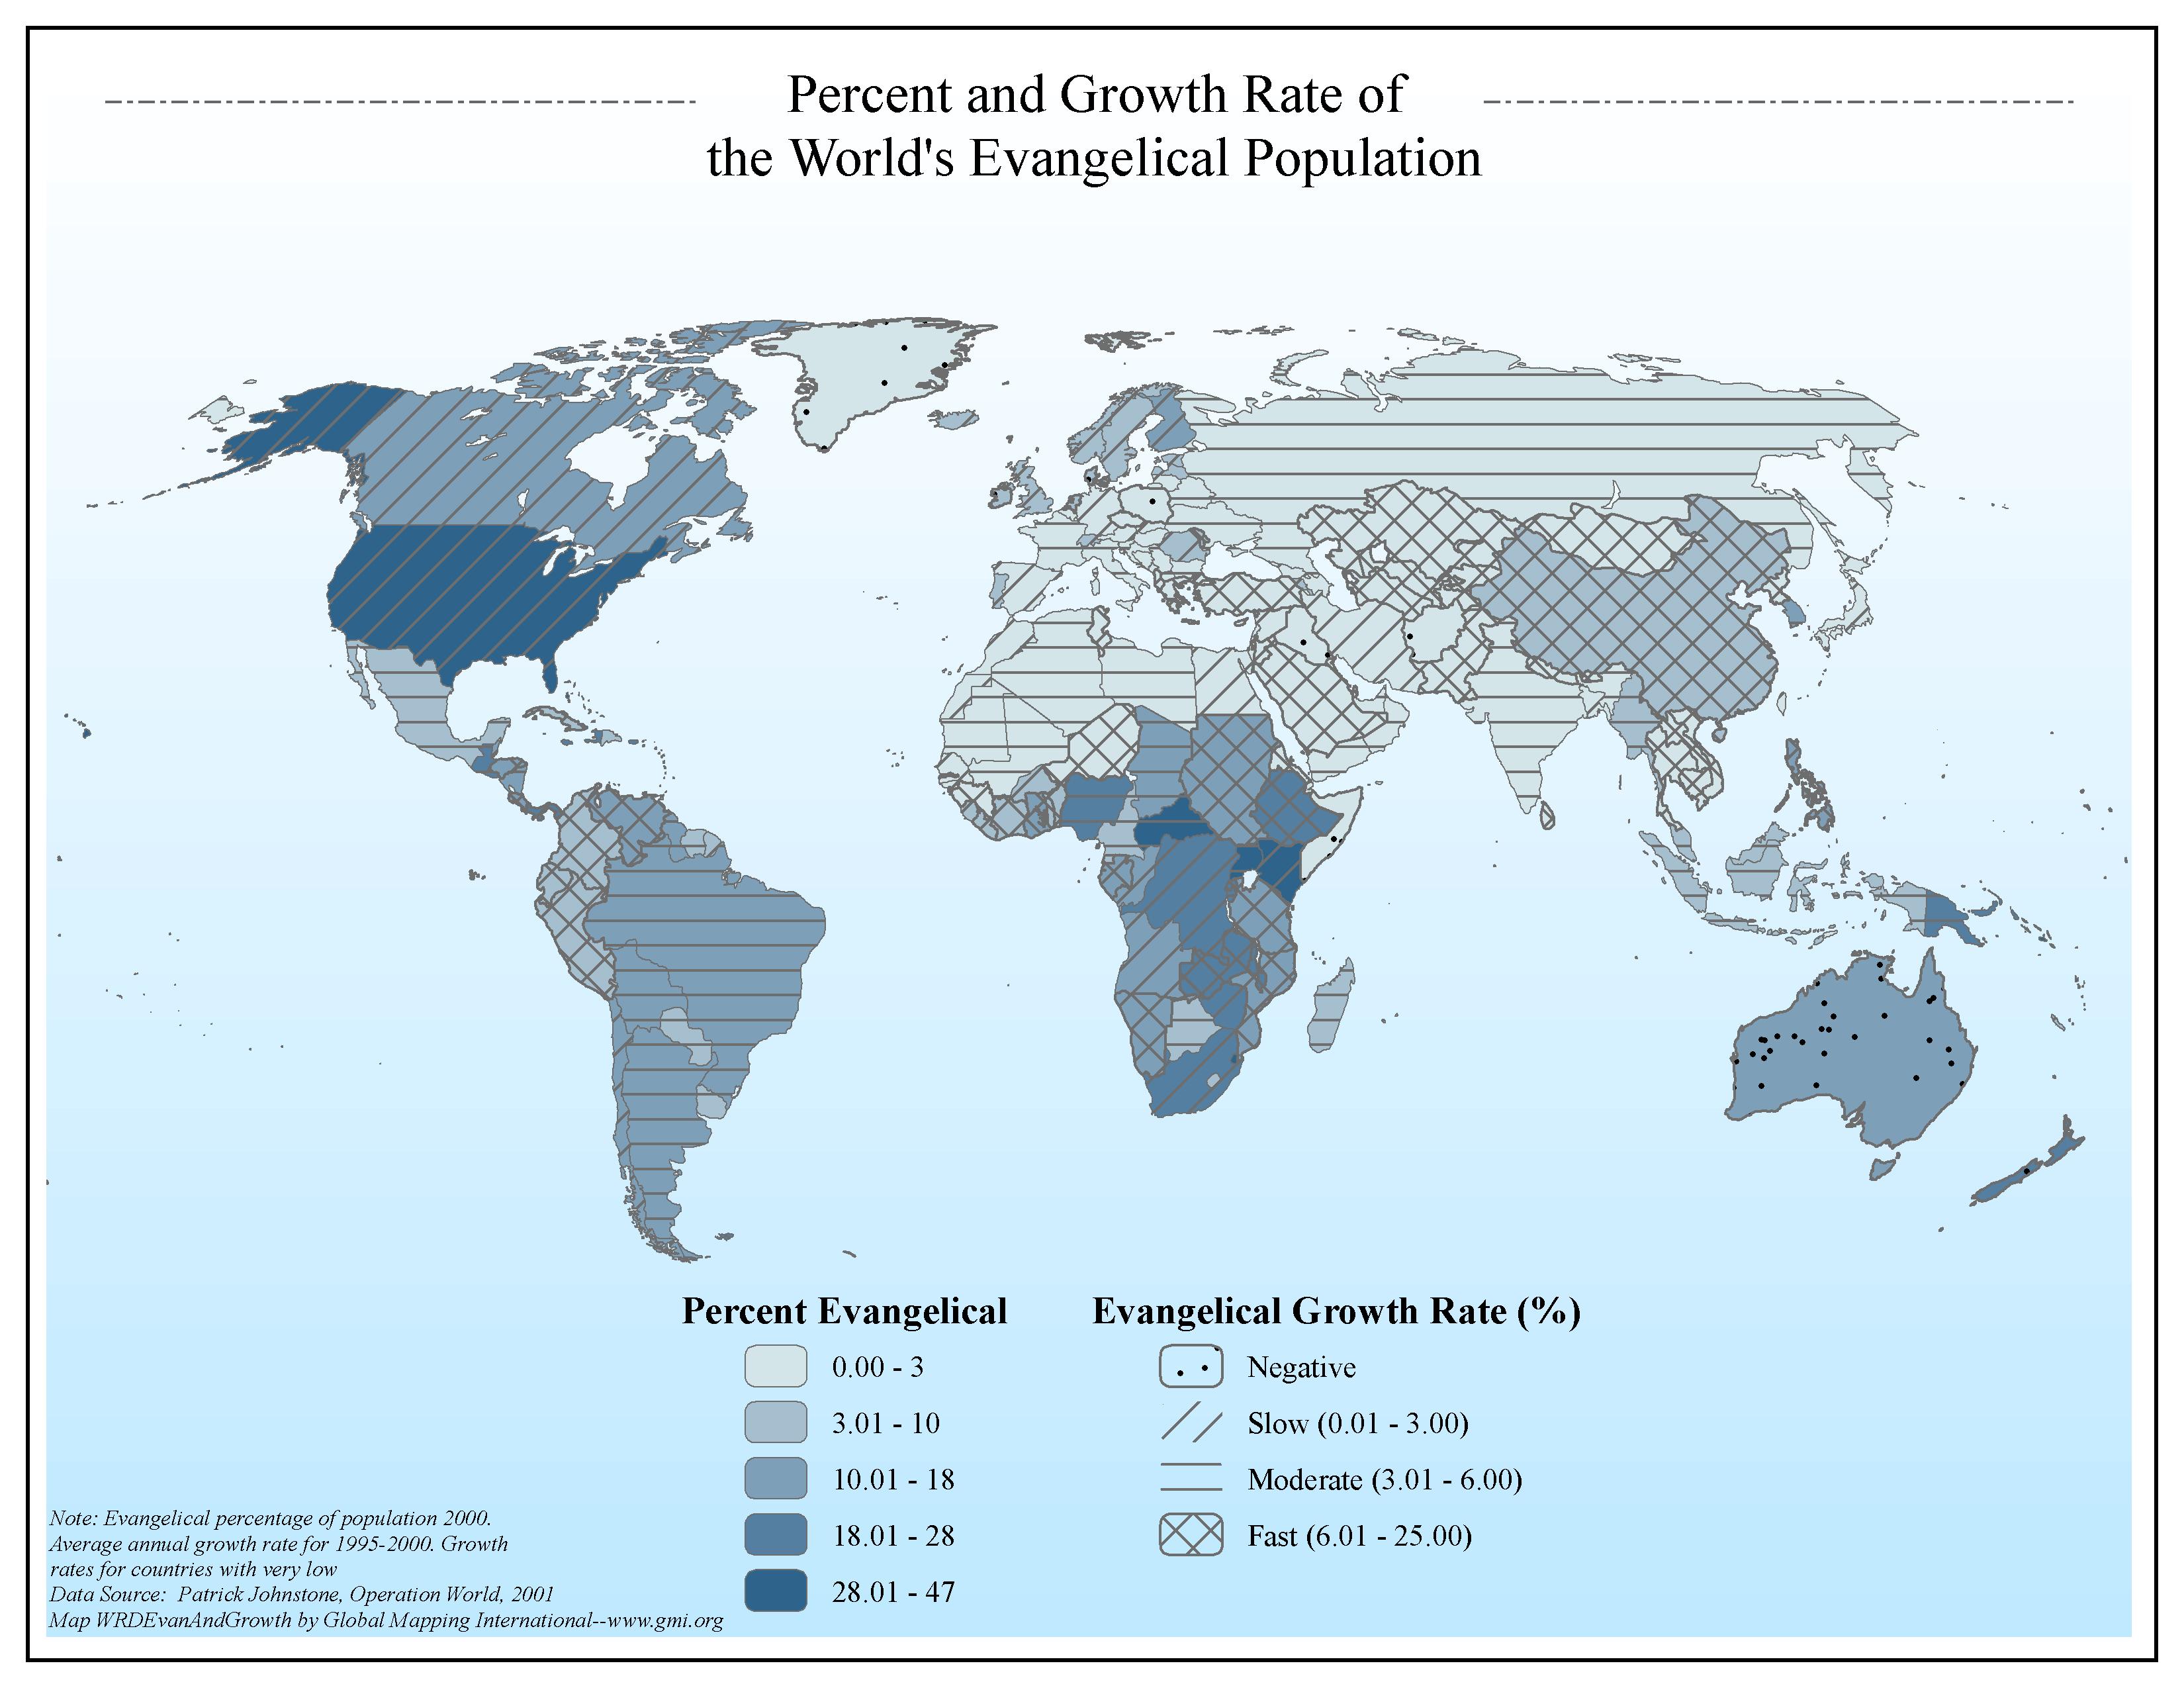 Percent and Growth Rate of the World's Evangelical Population